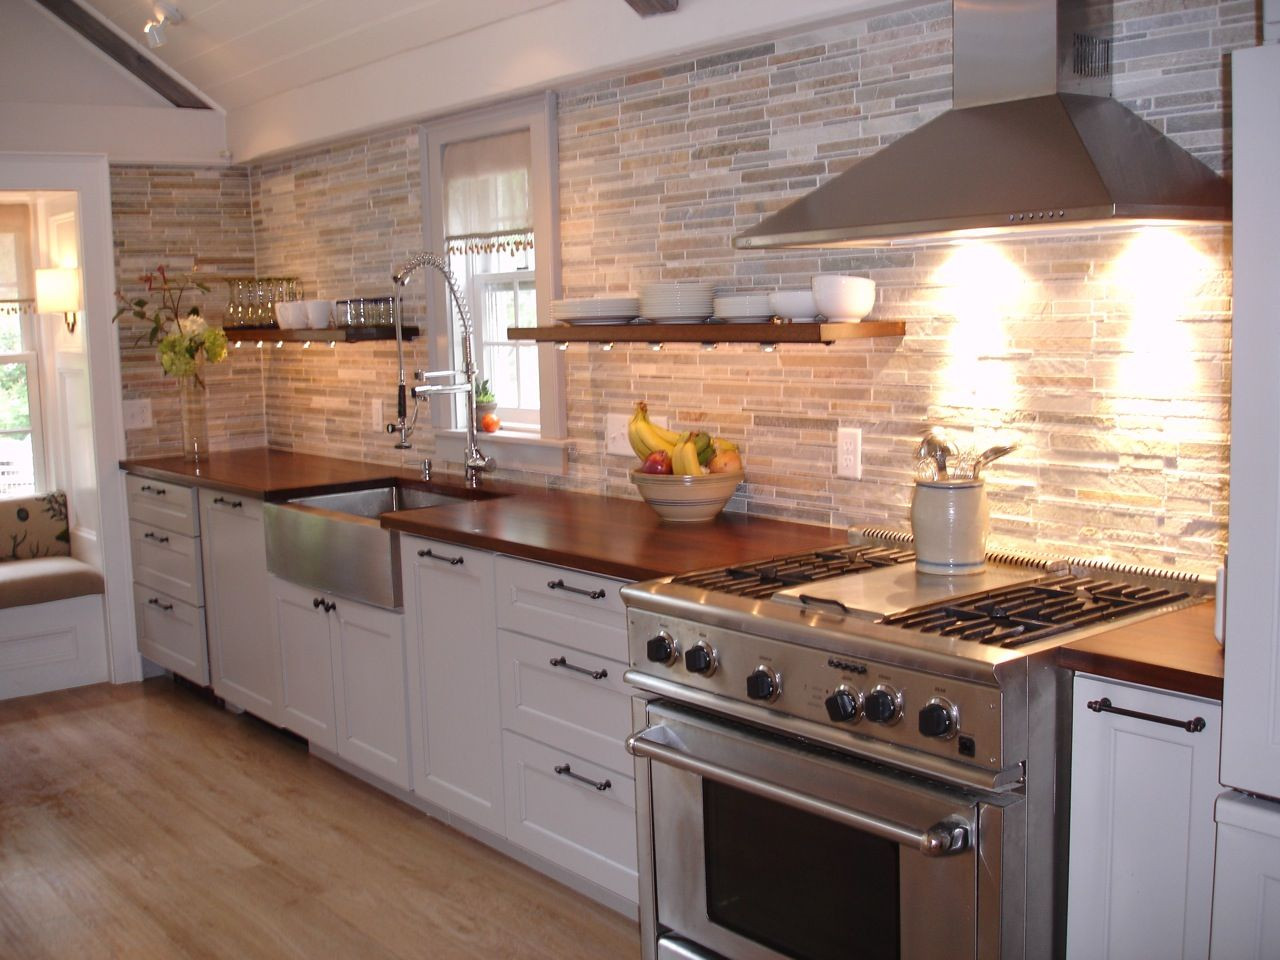 White Wood Kitchen Cabinets
 How To Choose A Wood Countertop For Your Kitchen